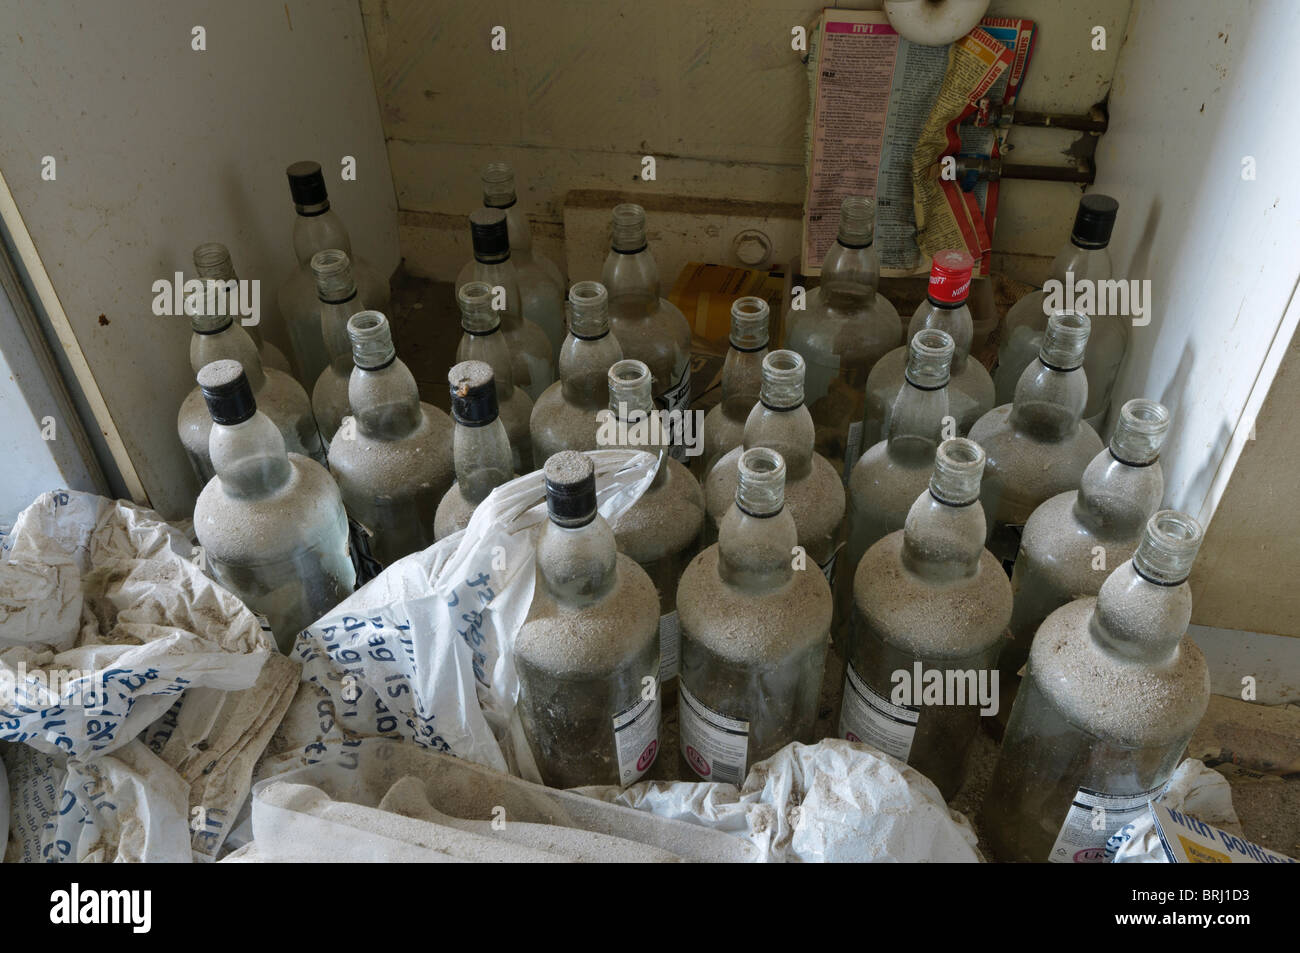 Lots of empty vodka bottles in an abandoned flat, covered in a thick layer of dust Stock Photo